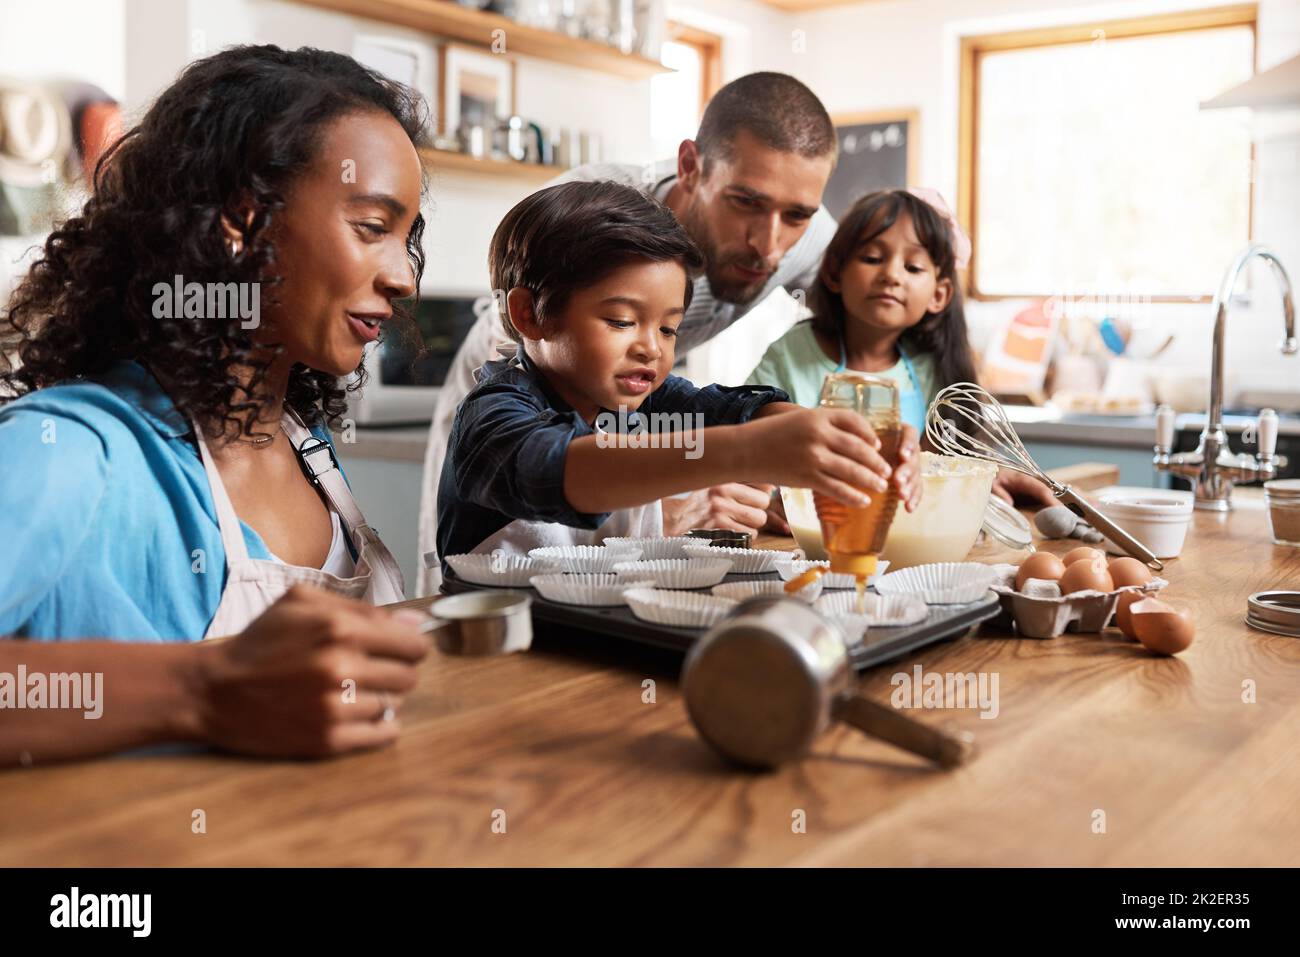 I want some extra honey in mine. Cropped shot of a young couple baking at home with their two children. Stock Photo